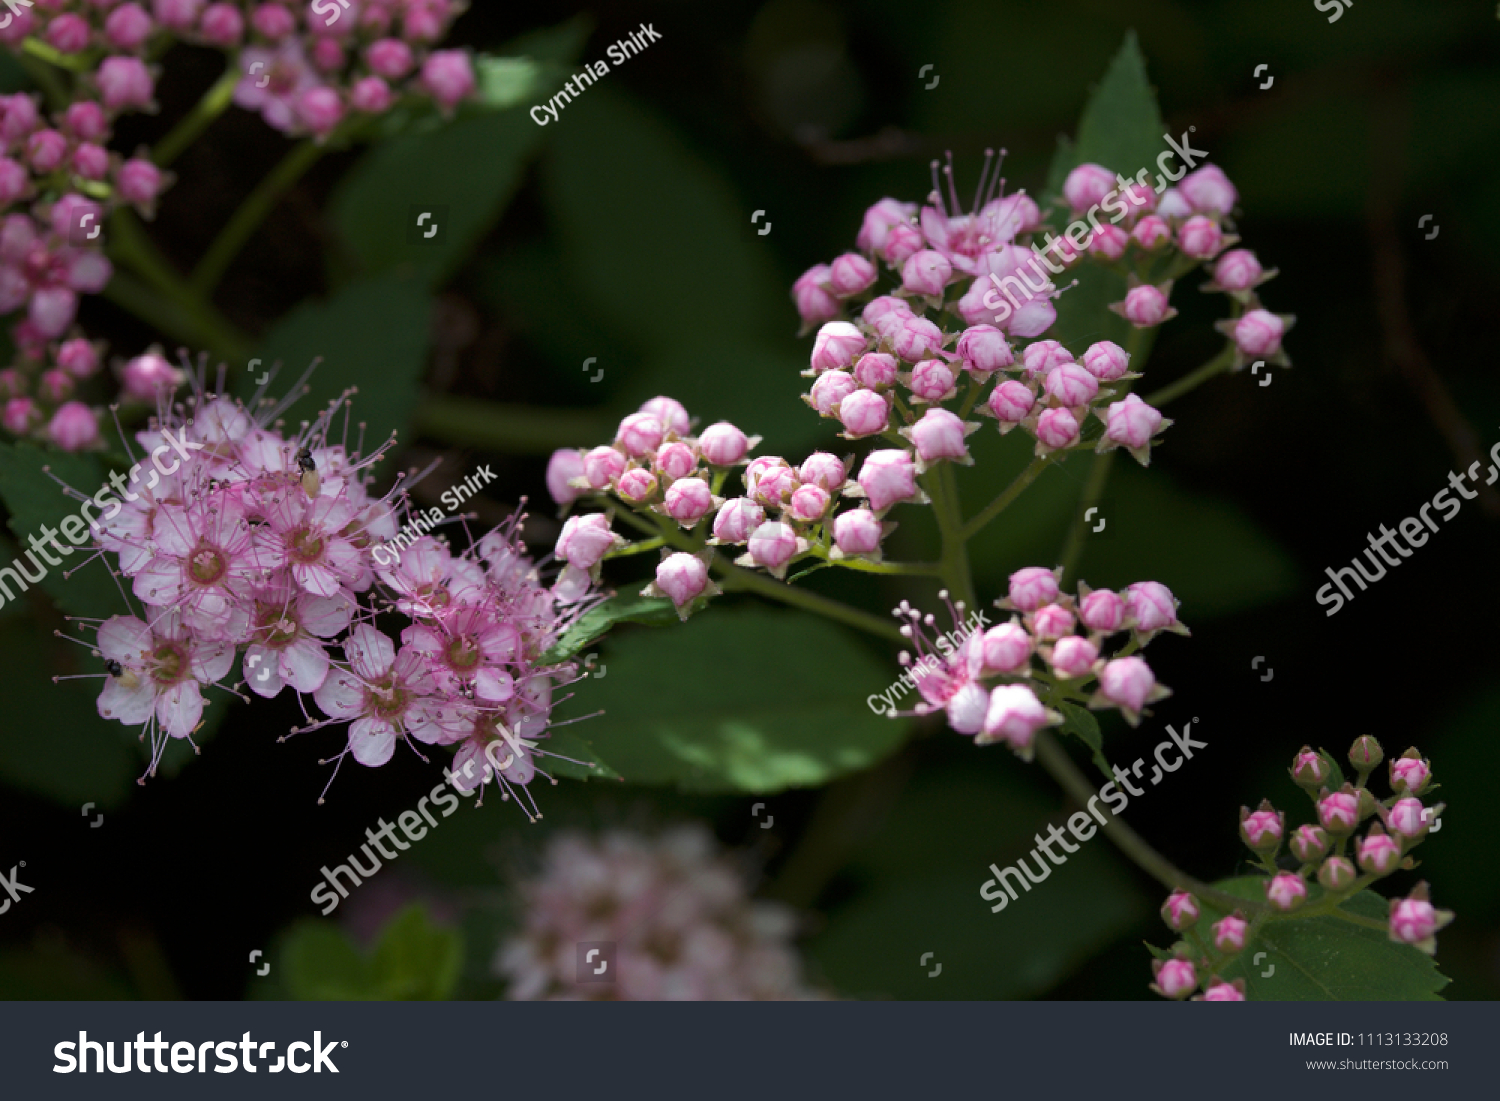 Close up macro view of newly blossoming tiny bright pink compact spirea (Spiraea) flower clusters #1113133208